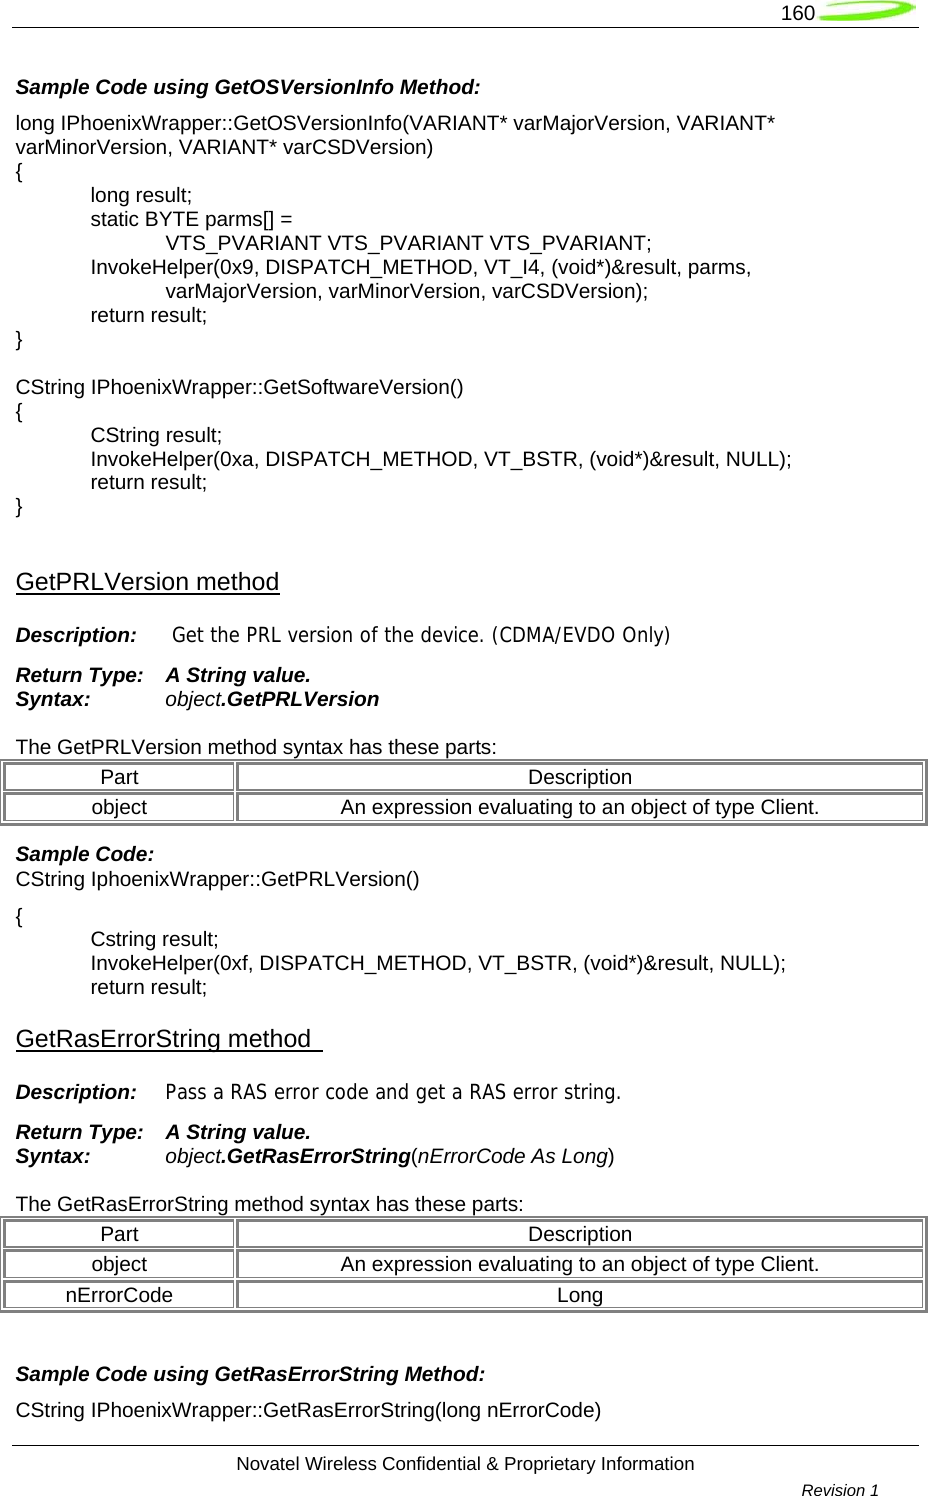   160  Novatel Wireless Confidential &amp; Proprietary Information        Revision 1   Sample Code using GetOSVersionInfo Method: long IPhoenixWrapper::GetOSVersionInfo(VARIANT* varMajorVersion, VARIANT* varMinorVersion, VARIANT* varCSDVersion) {  long result;   static BYTE parms[] =   VTS_PVARIANT VTS_PVARIANT VTS_PVARIANT;  InvokeHelper(0x9, DISPATCH_METHOD, VT_I4, (void*)&amp;result, parms,   varMajorVersion, varMinorVersion, varCSDVersion);  return result; }  CString IPhoenixWrapper::GetSoftwareVersion() {  CString result;  InvokeHelper(0xa, DISPATCH_METHOD, VT_BSTR, (void*)&amp;result, NULL);  return result; }  GetPRLVersion method Description:   Get the PRL version of the device. (CDMA/EVDO Only) Return Type:  A String value. Syntax:  object.GetPRLVersion  The GetPRLVersion method syntax has these parts: Part Description object  An expression evaluating to an object of type Client. Sample Code:  CString IphoenixWrapper::GetPRLVersion() {  Cstring result;  InvokeHelper(0xf, DISPATCH_METHOD, VT_BSTR, (void*)&amp;result, NULL);  return result; GetRasErrorString method   Description:  Pass a RAS error code and get a RAS error string. Return Type:  A String value. Syntax:  object.GetRasErrorString(nErrorCode As Long)  The GetRasErrorString method syntax has these parts: Part Description object  An expression evaluating to an object of type Client. nErrorCode Long  Sample Code using GetRasErrorString Method: CString IPhoenixWrapper::GetRasErrorString(long nErrorCode) 